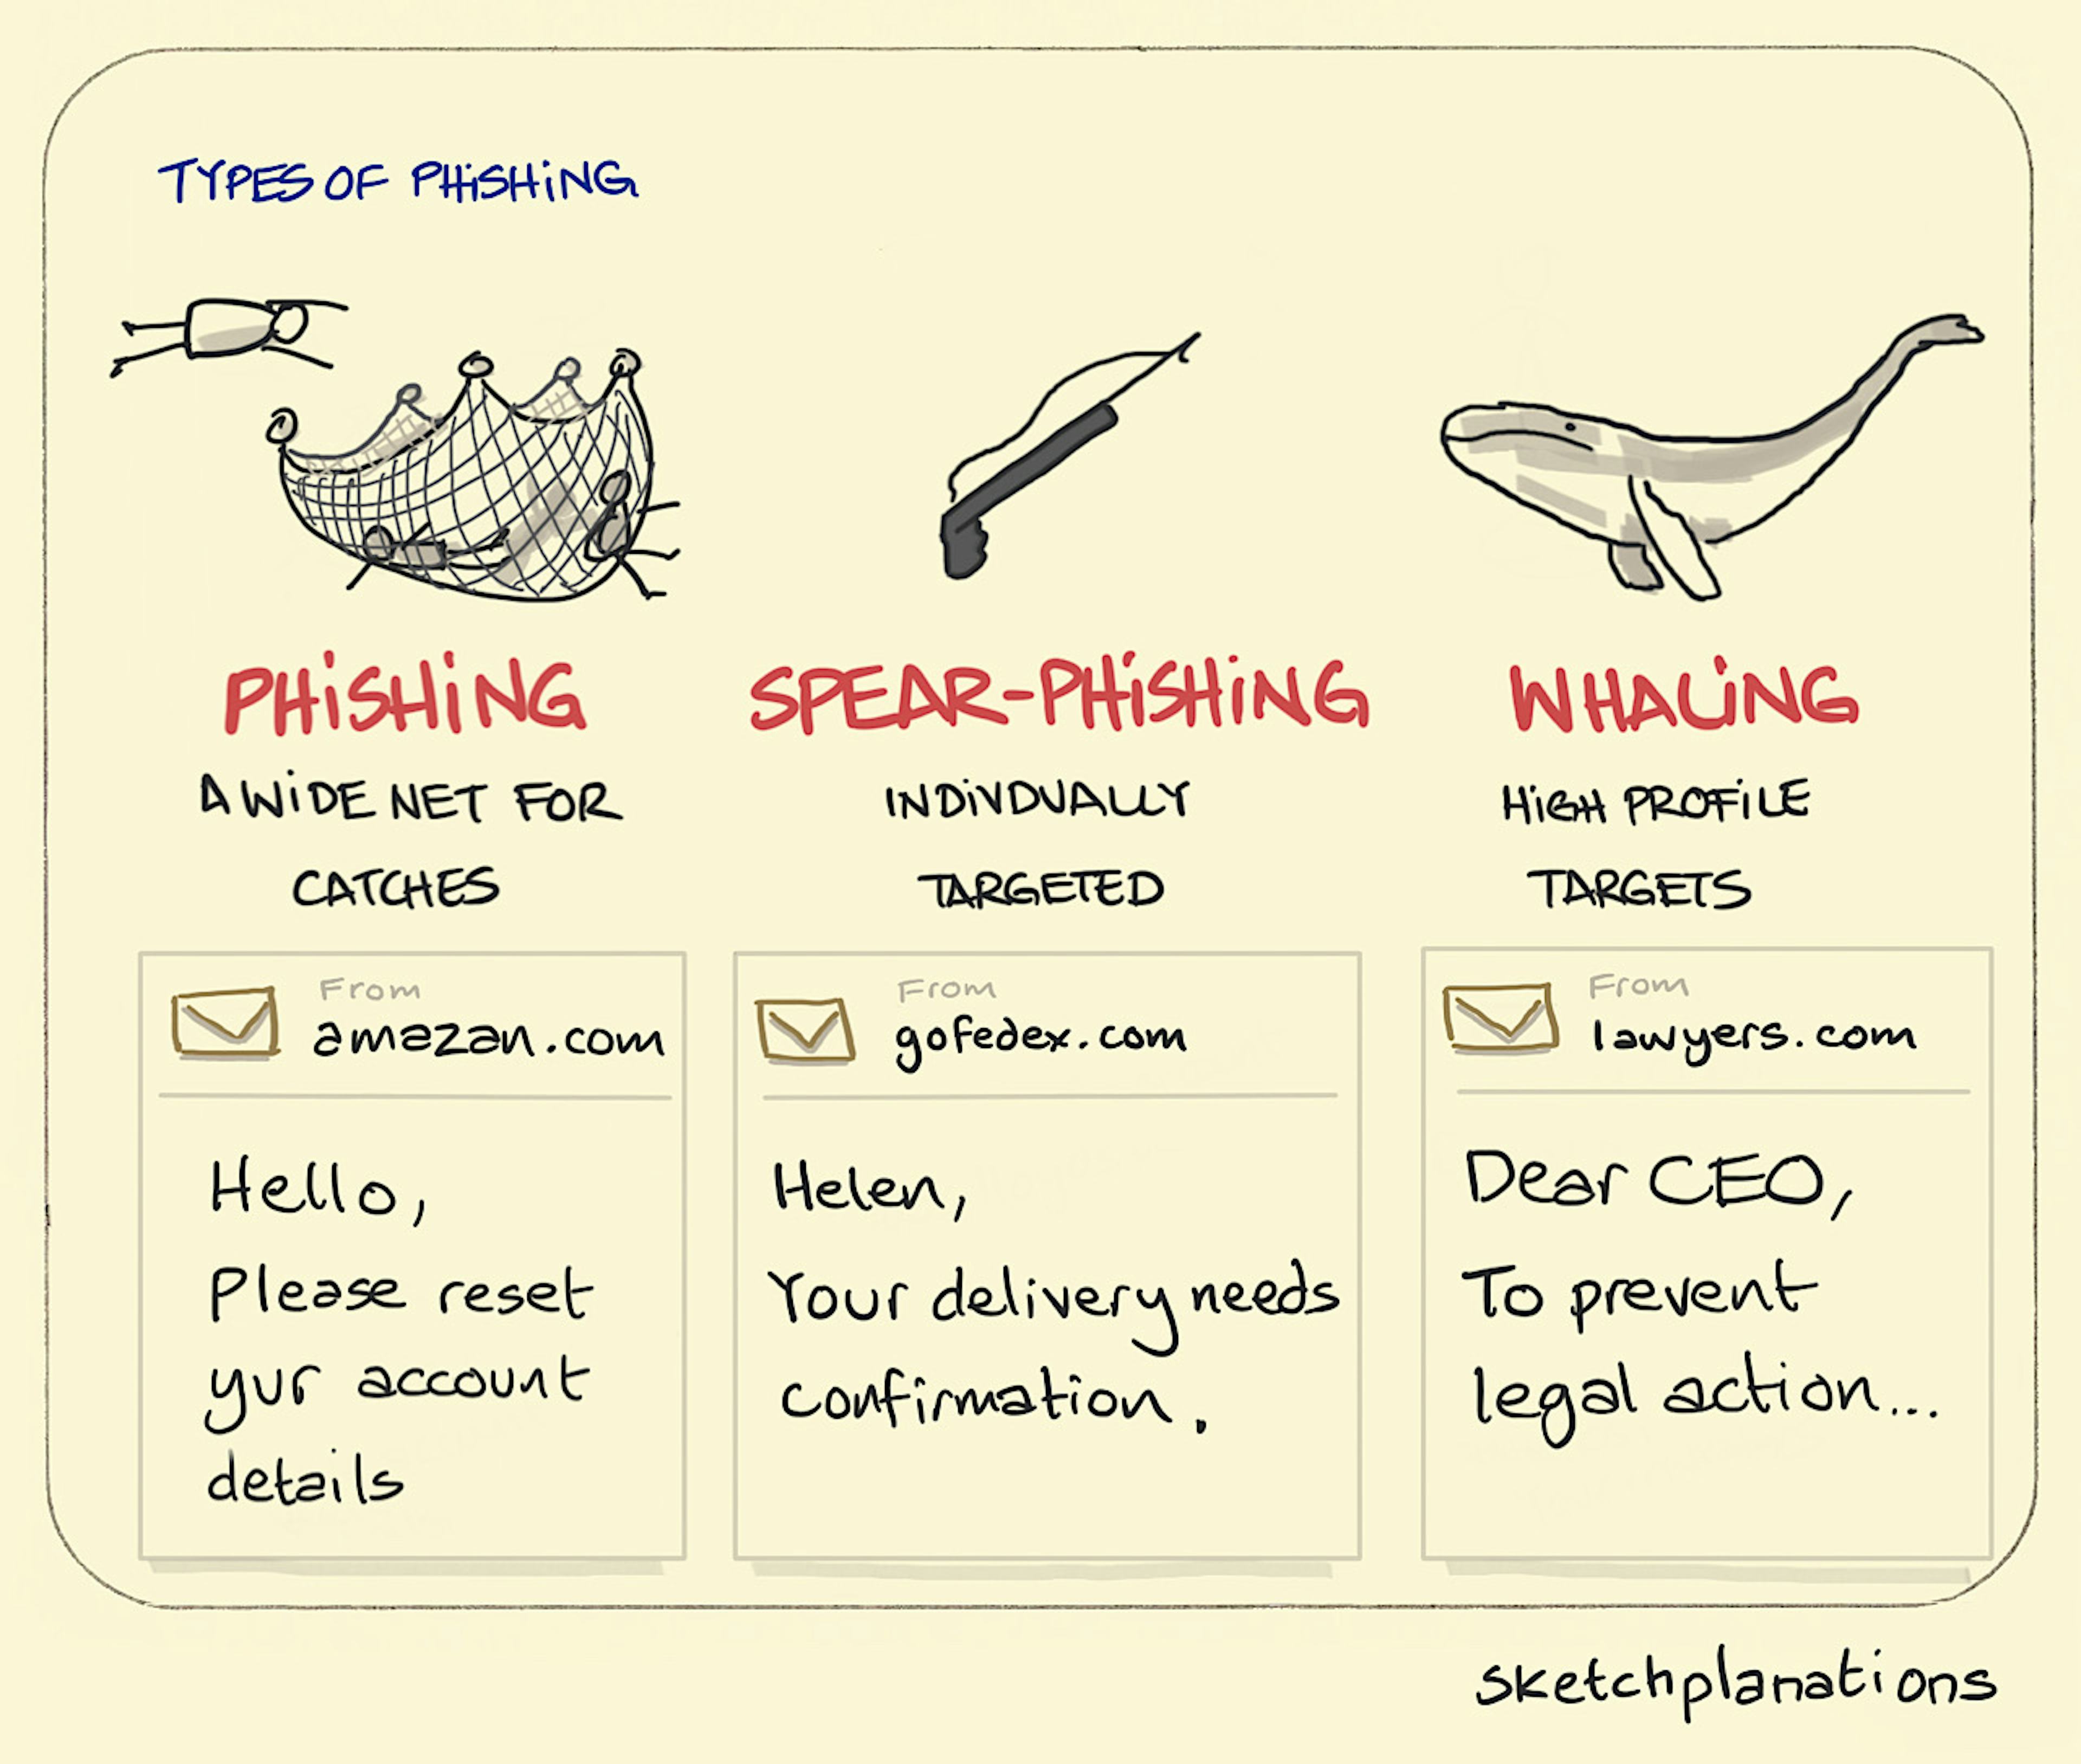 Types of phishing illustration: 3 common types of phishing communications are shown from the impersonal, wide phishing net email, thrown out to a large population; to more personalised "spear-phishing", picking you off with a harpoon gun; to whaling, where scammers go after high profile targets like CEOs. 